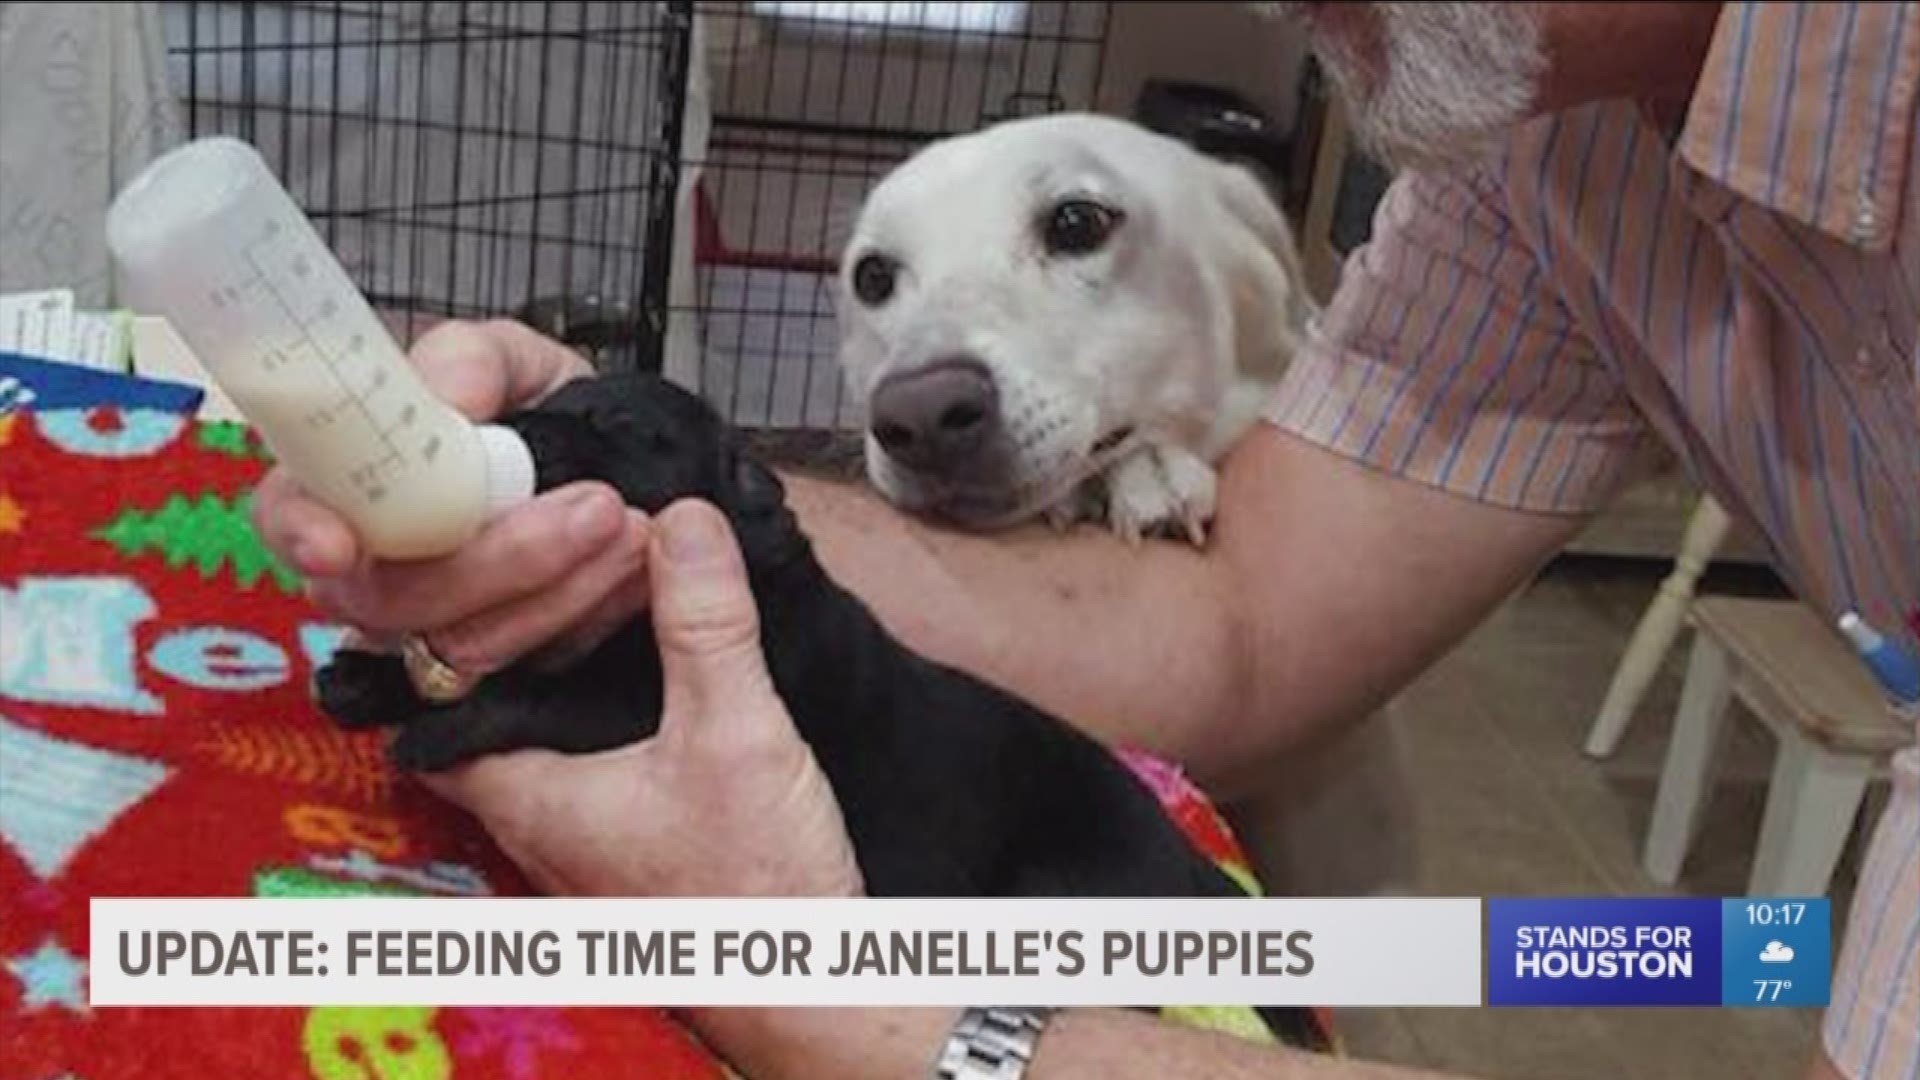 The Harris County Public Health shared a photo of Janelle the dog keeping a close eye on her pups while Dr. White, their foster, feeds them. 